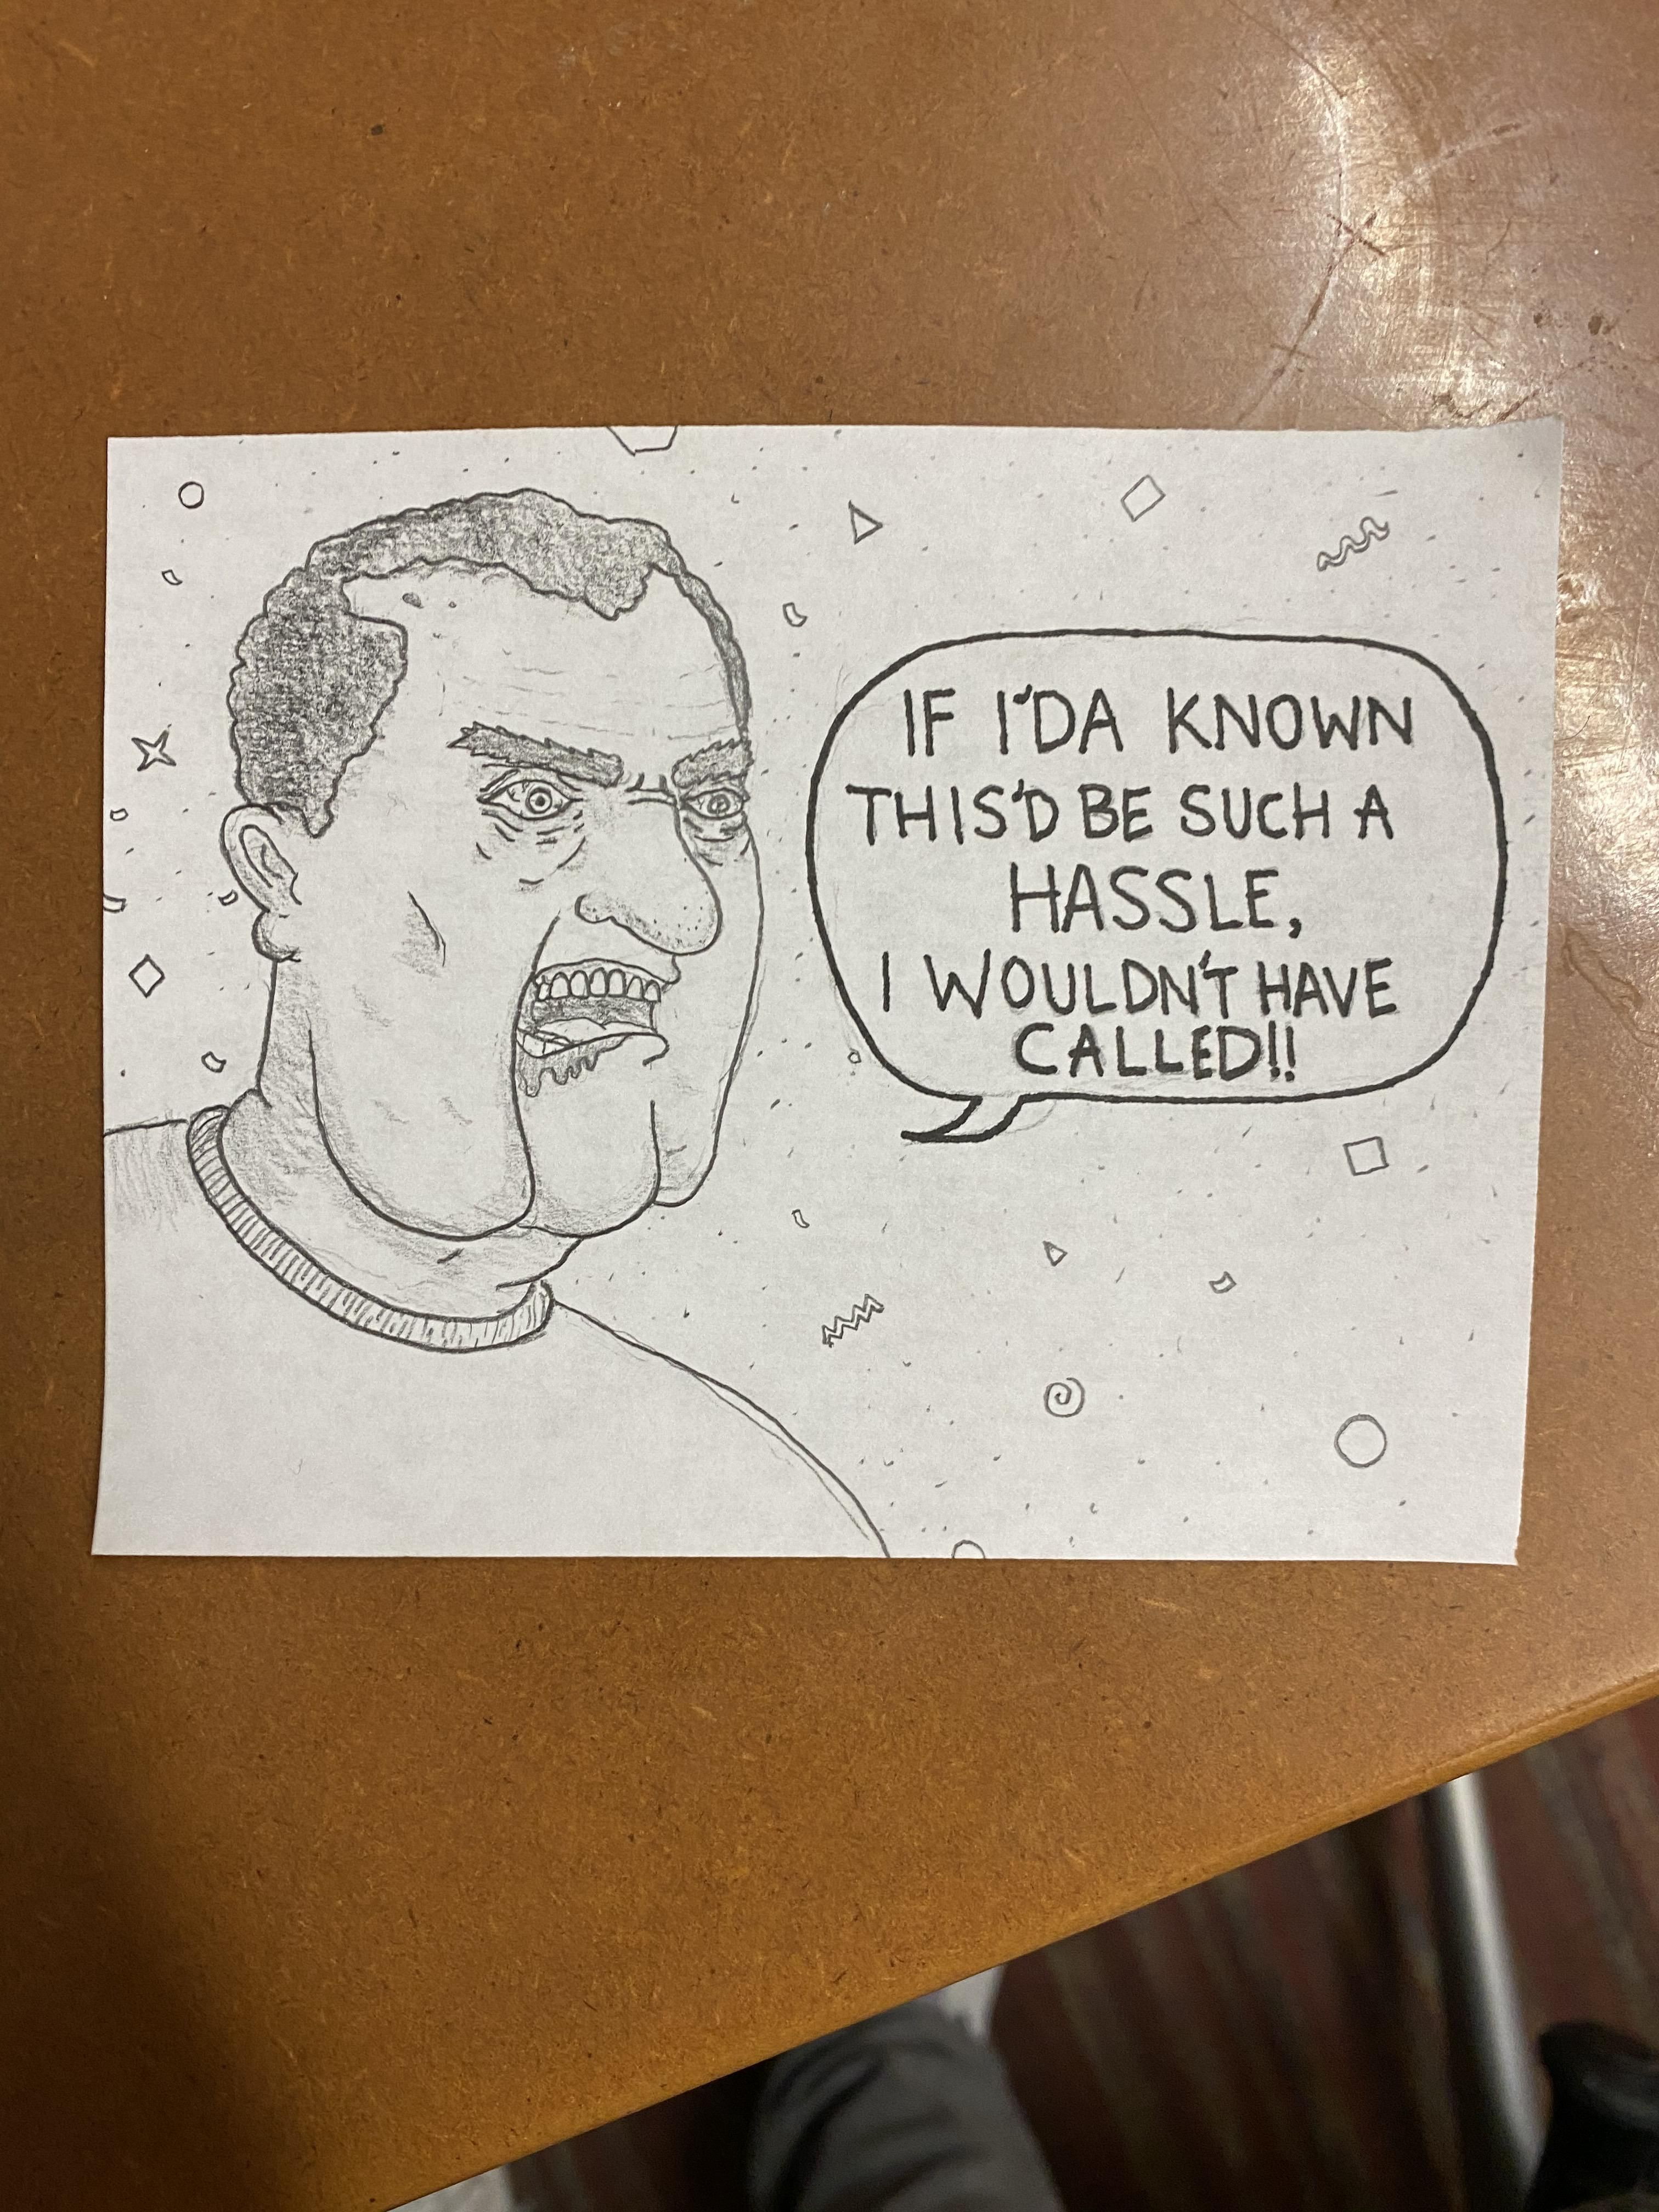 I work at a call center. I like to draw my callers sometimes. This is a real response I got from a guy today after I asked a him for HIS phone number.